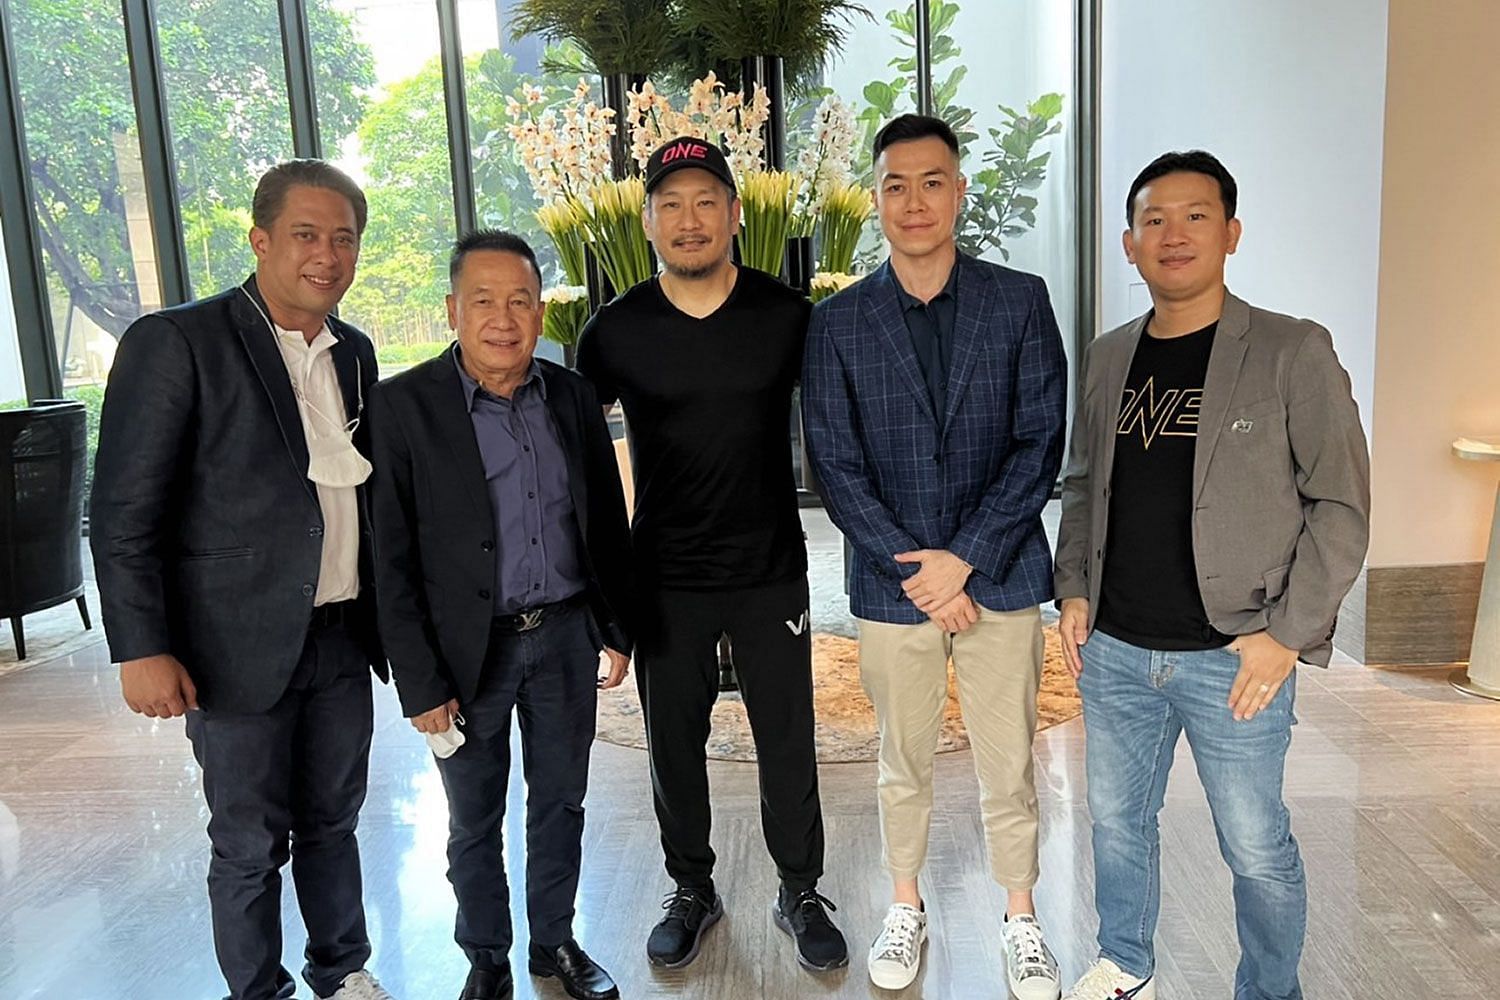 ONE Championship CEO Chatri Sityodtong (third from right) and Fairtex promoter Prem Busarabavonwongs (second from right) [Photo Credit: Fairtex Instagram @fairtextrainingcenter]